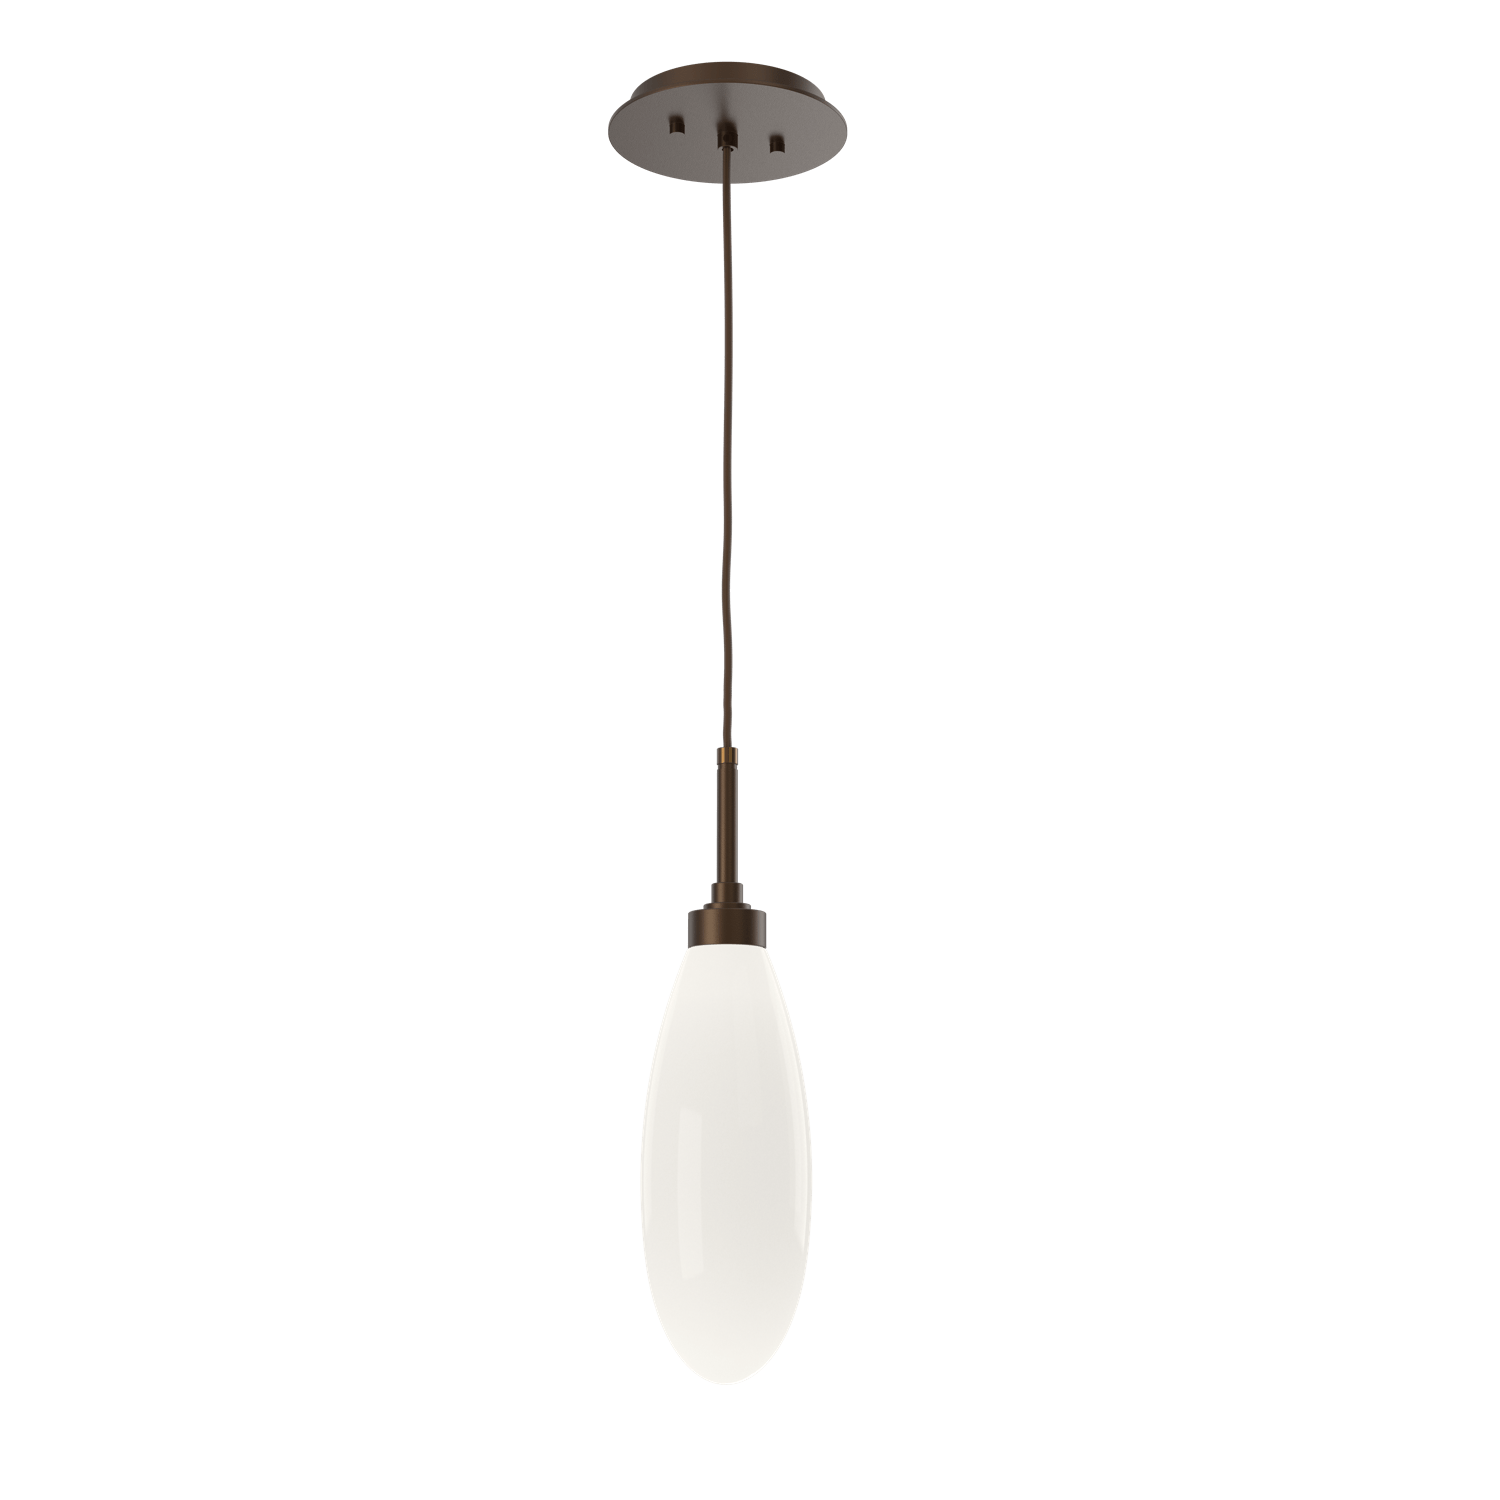 LAB0071-15-FB-WL-LL-Hammerton-Studio-Fiori-pendant-light-with-flat-bronze-finish-and-opal-white-glass-shades-and-LED-lamping